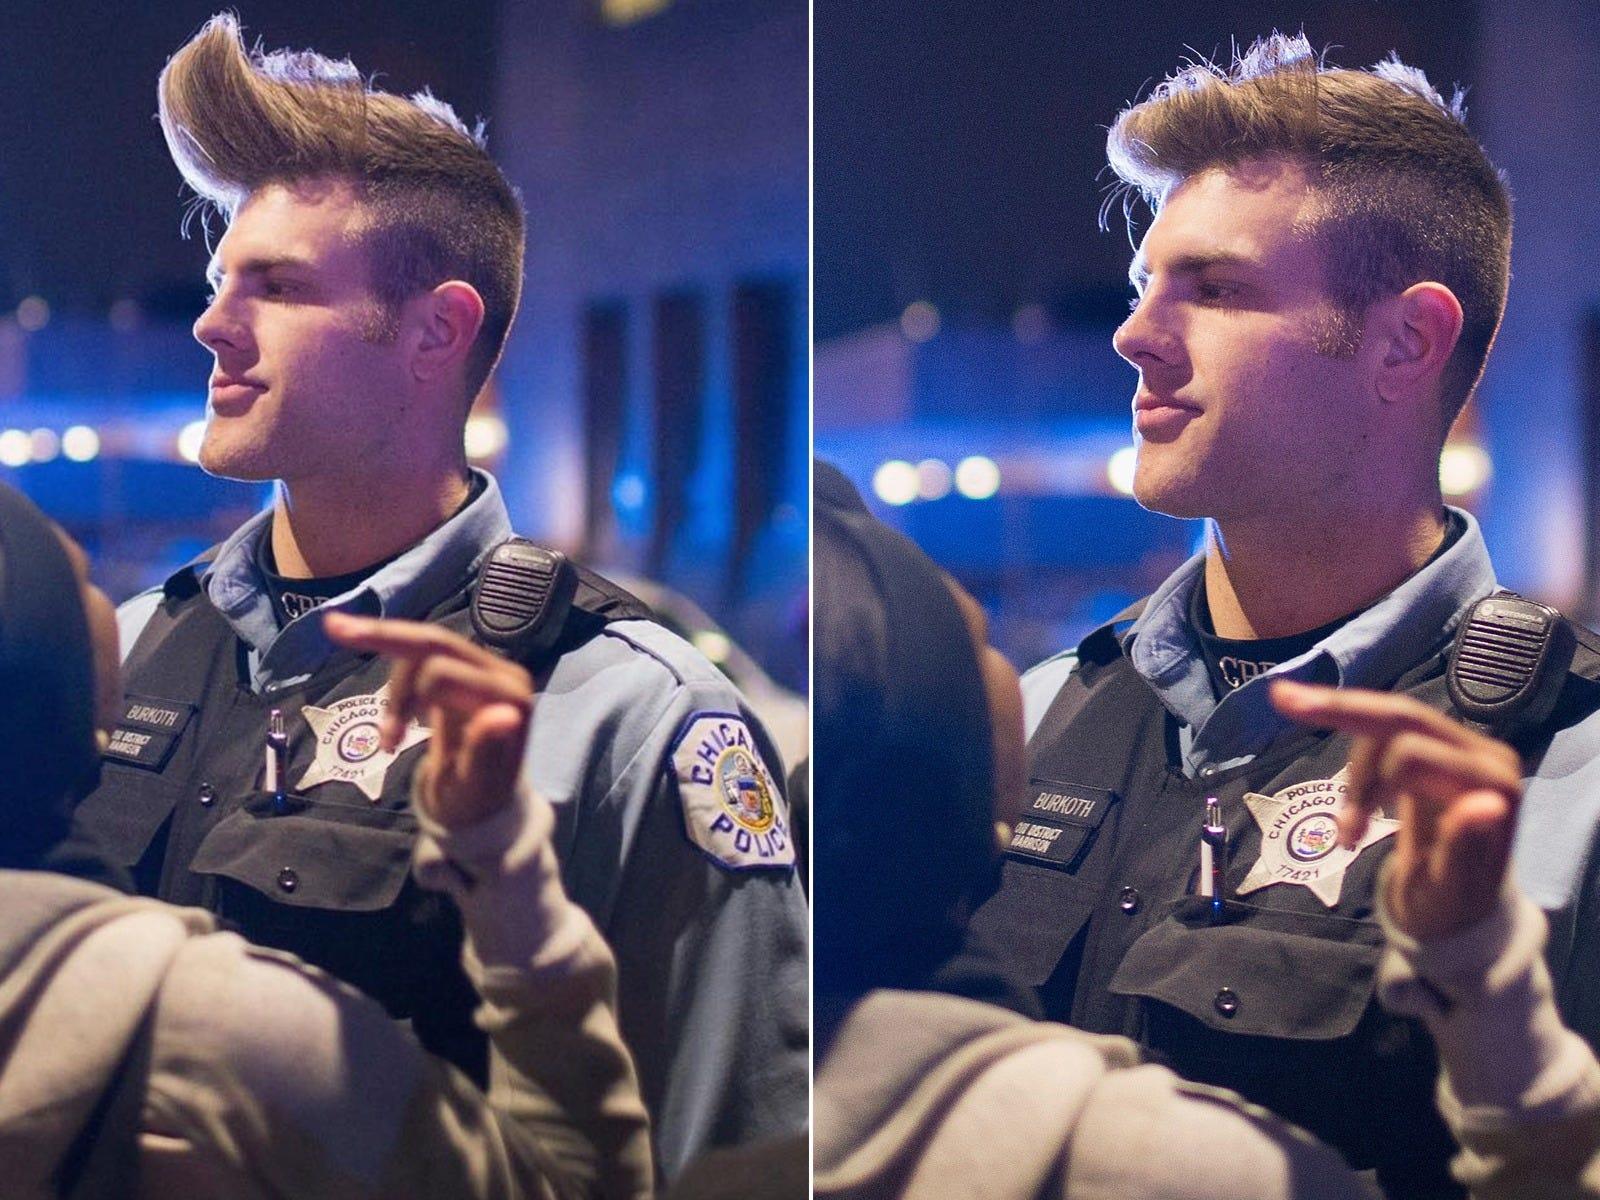 A viral photo of a 'Chad Cop' with an exaggerated hairstyle was